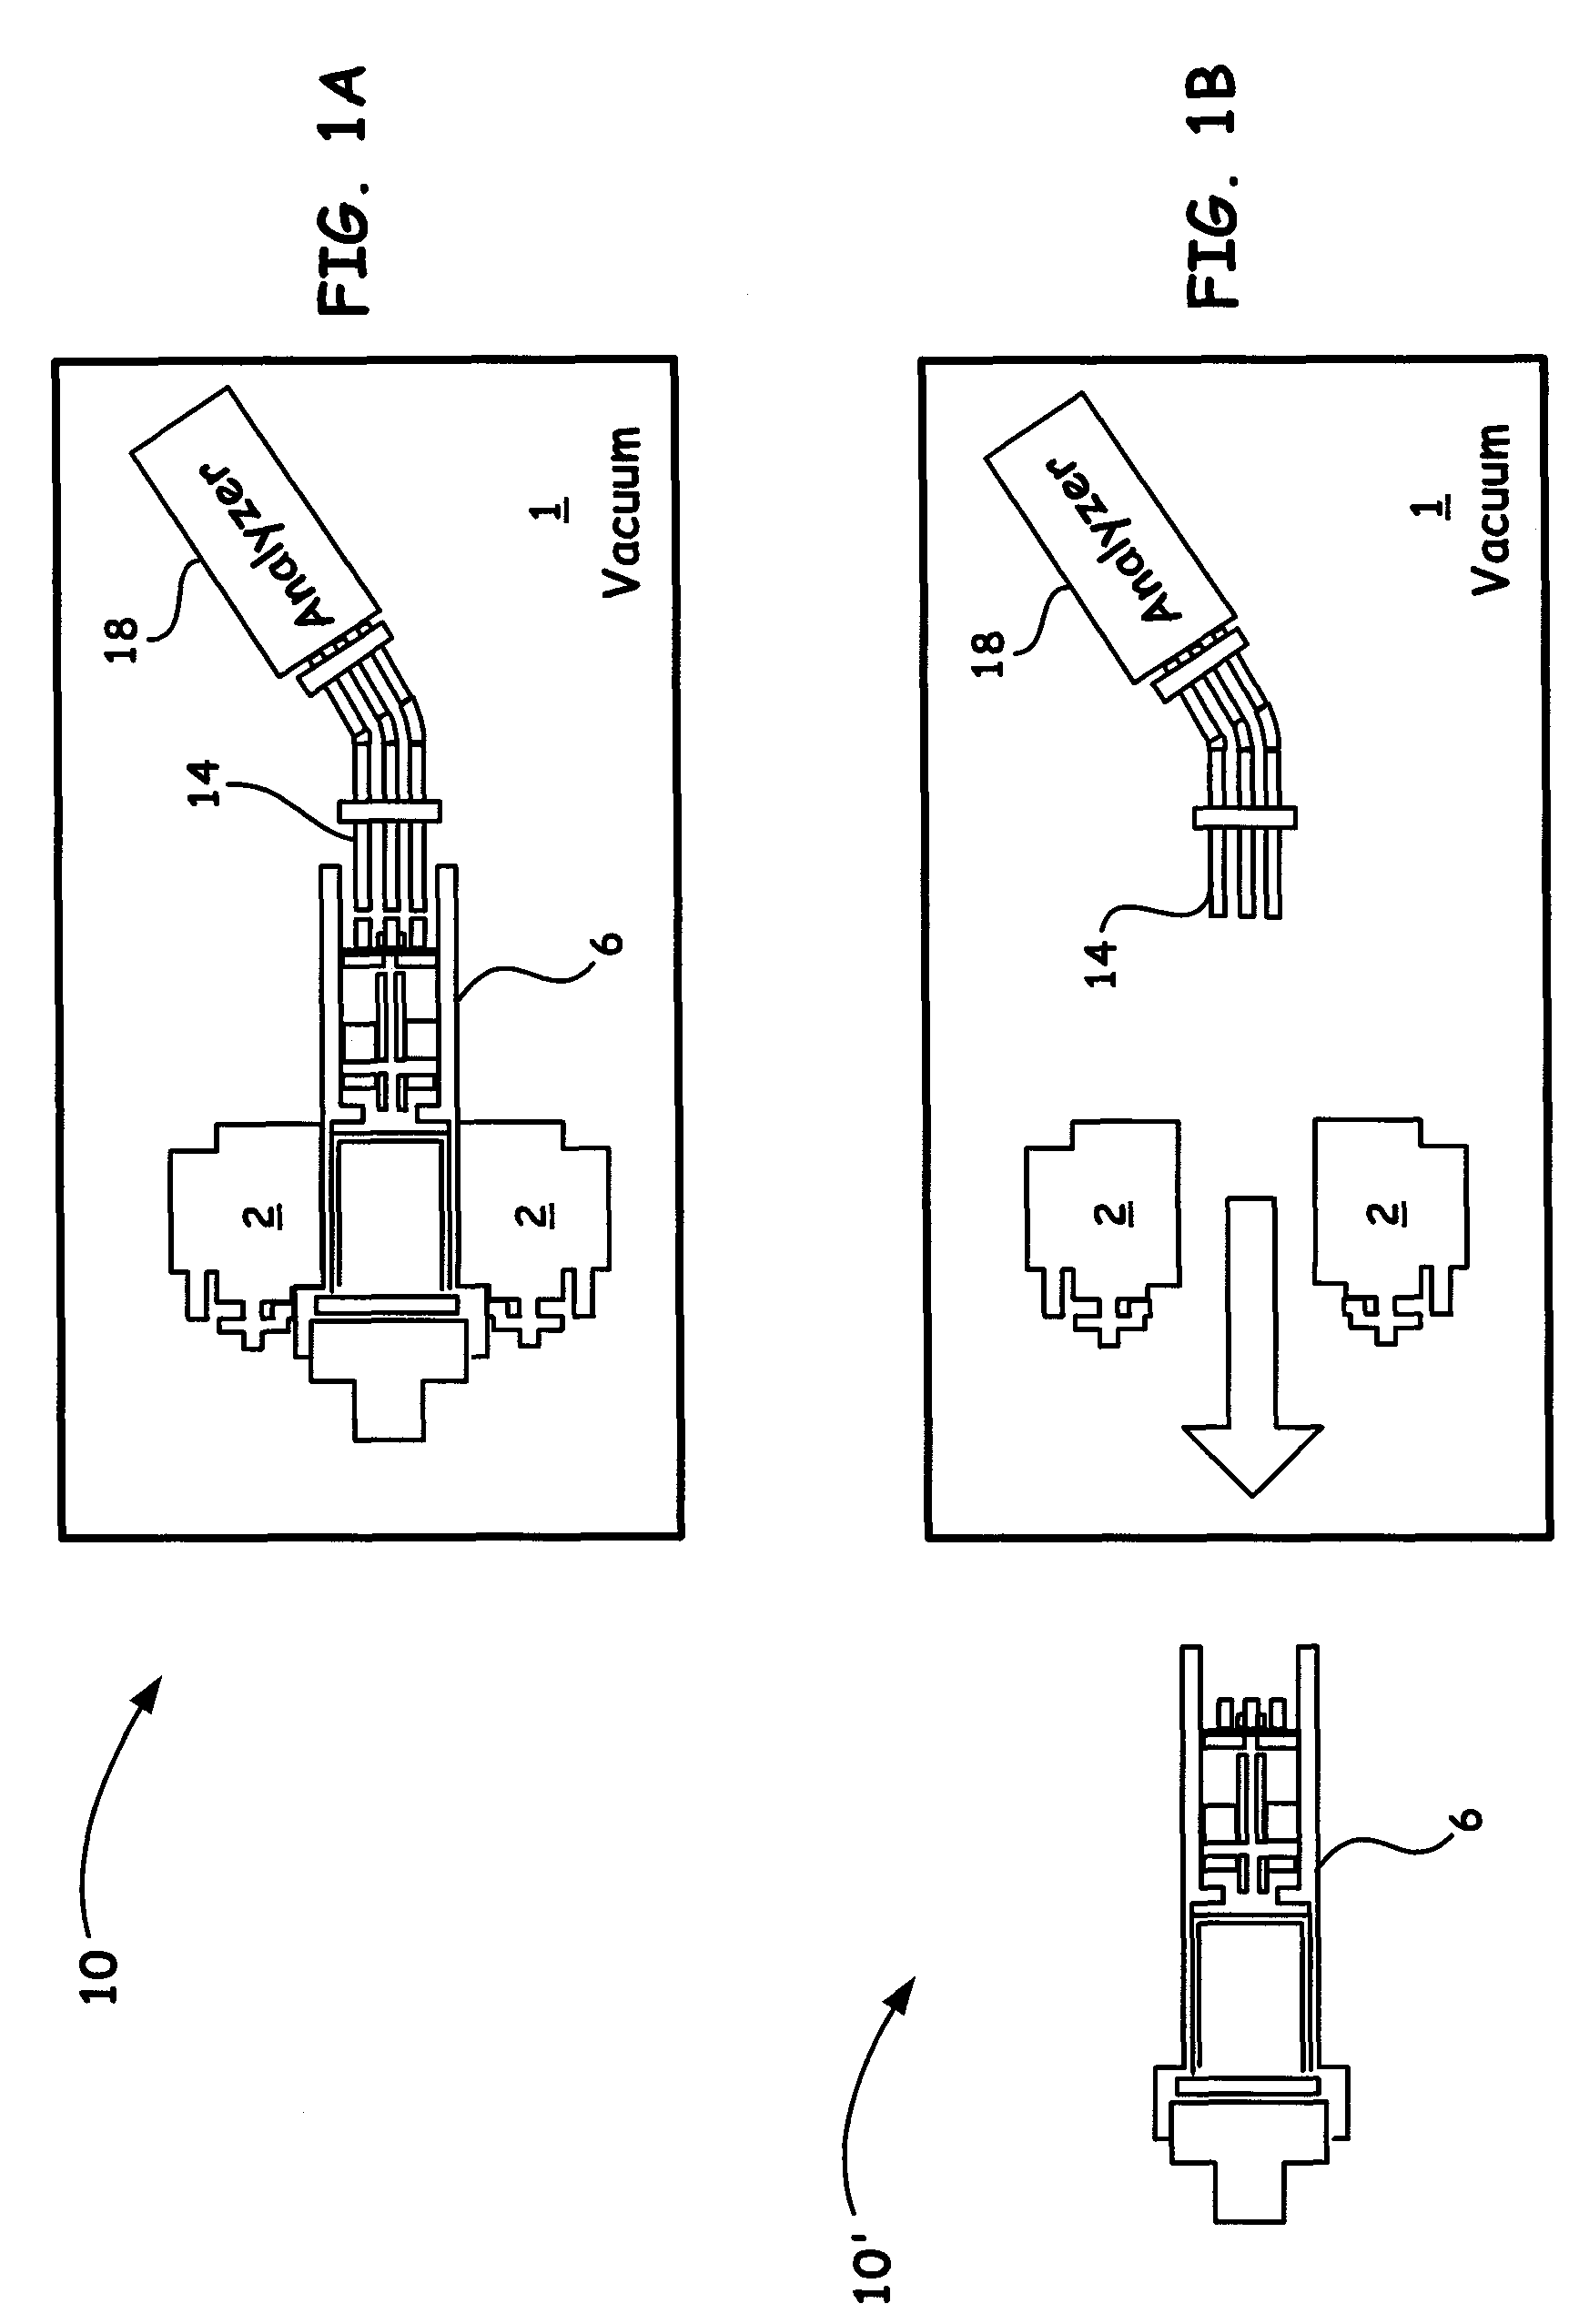 Removable ion source that does not require venting of the vacuum chamber